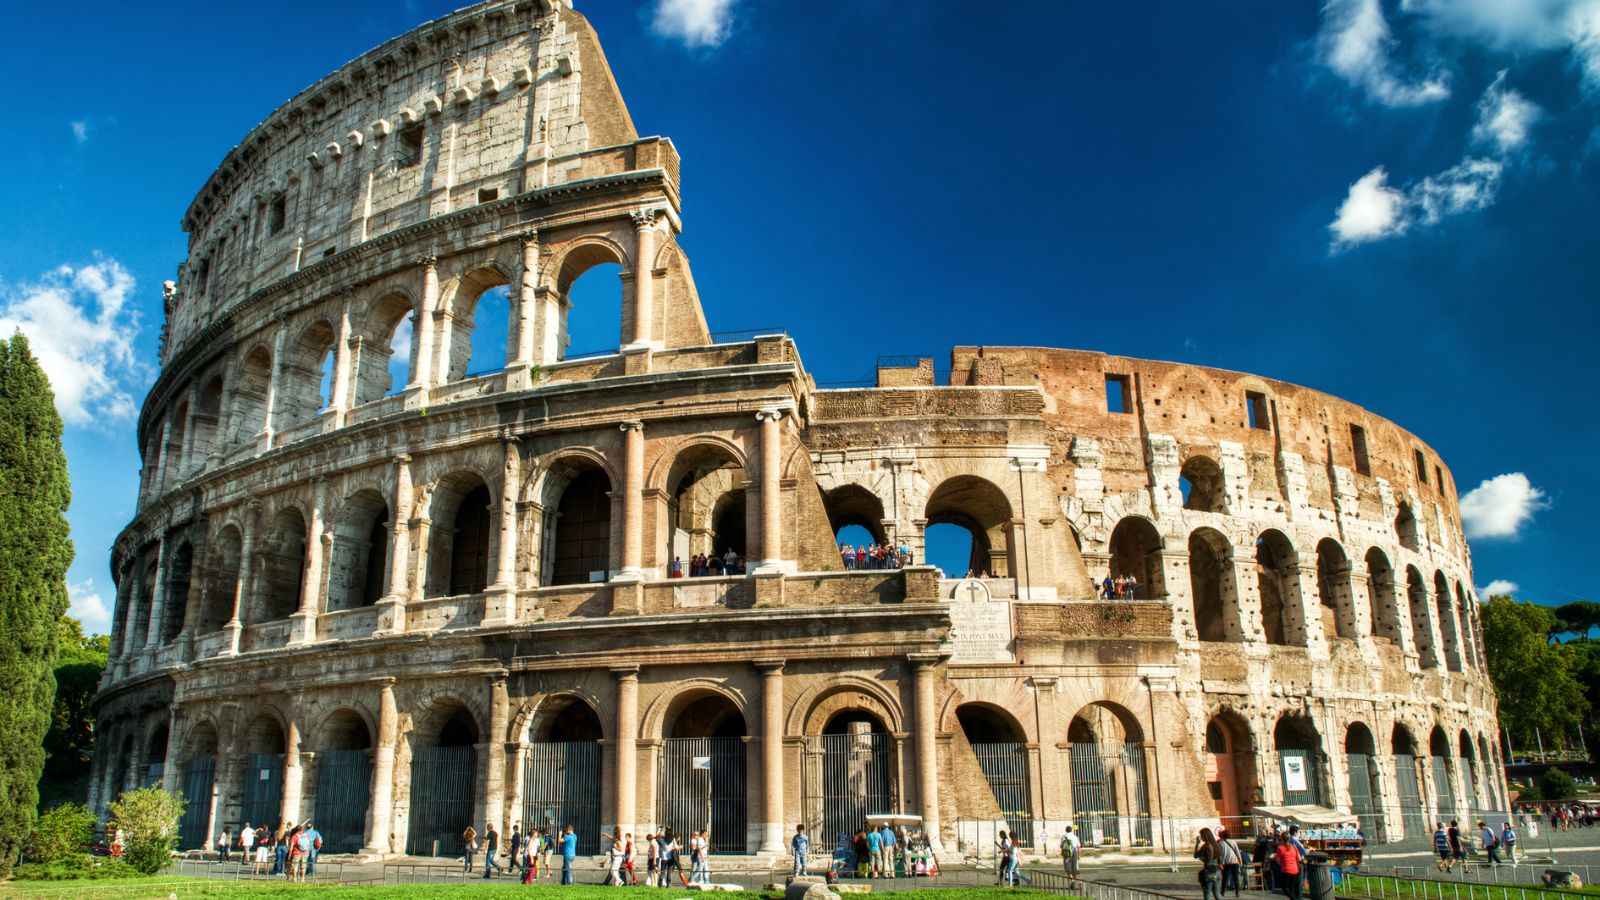 <p>Looking for the best things to do in Italy? Whether you’re exploring the north or south, read on to discover a bunch of amazing options for your Italy itinerary.</p><p><a href="https://www.whatsdannydoing.com/best-things-to-do-in-italy" rel="noopener"><strong>14 UNMISSABLE THINGS TO DO IN ITALY</strong></a></p>